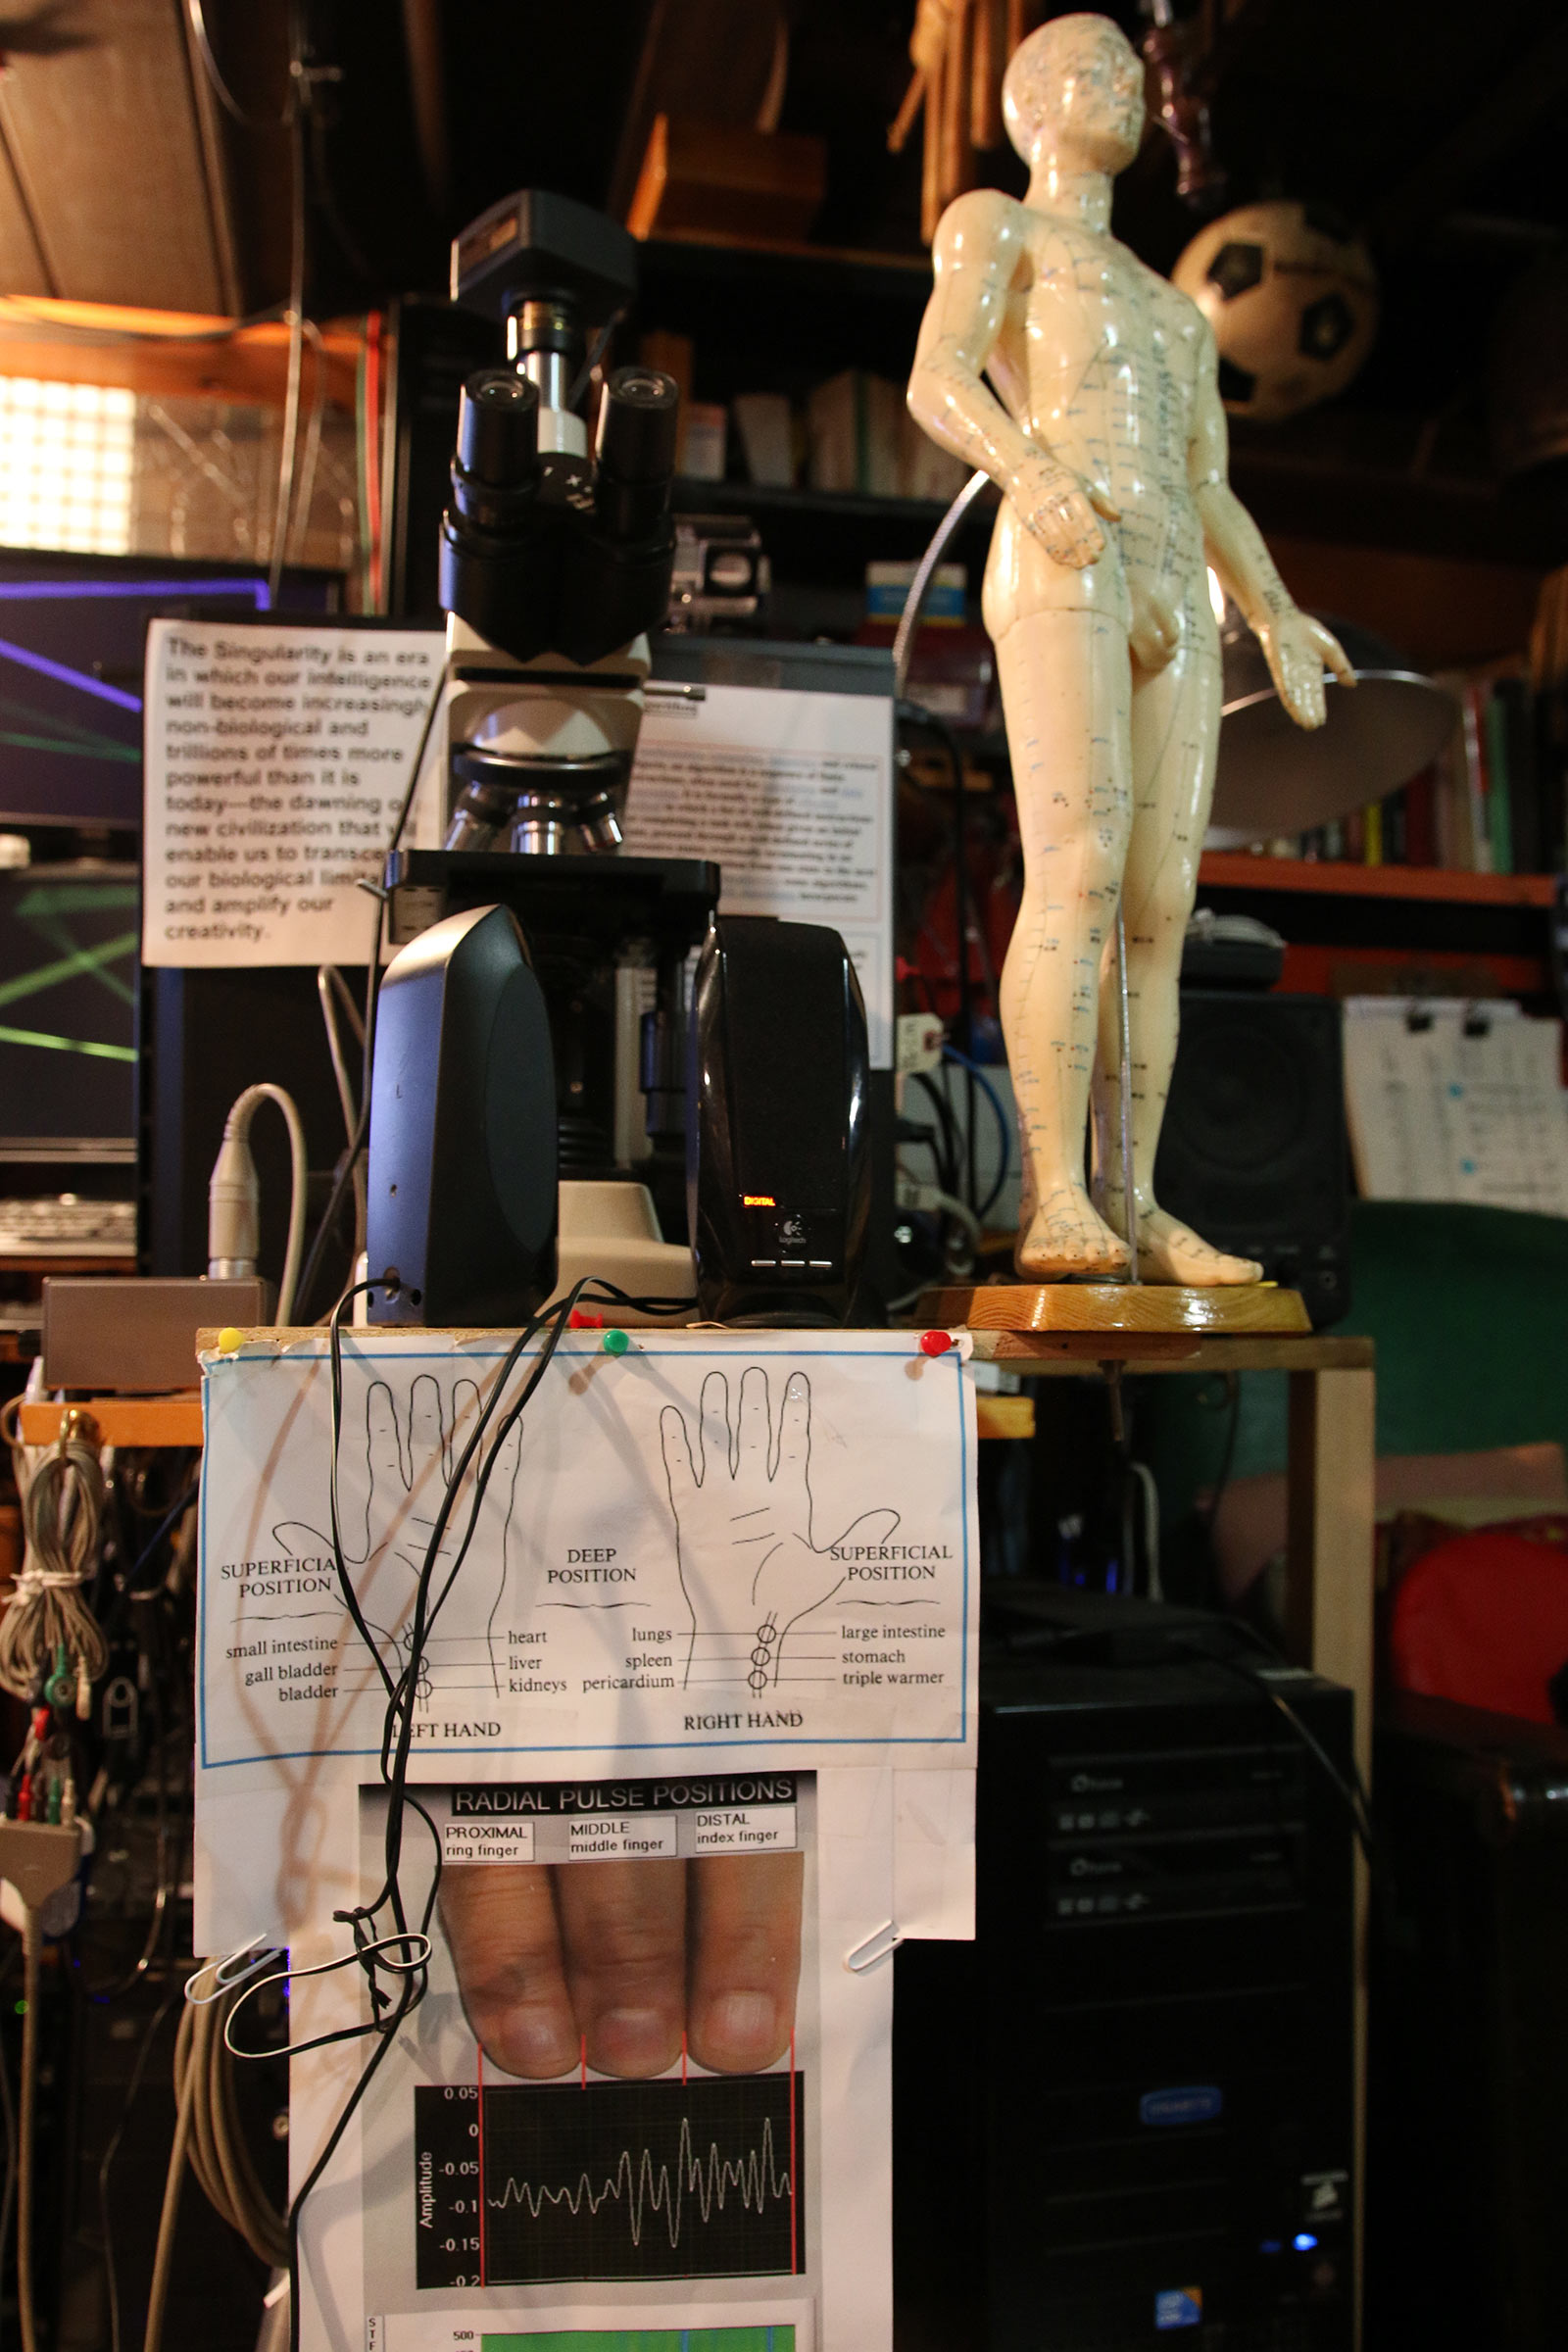 In one area in Graves's studio there is a diagram of hands, a photo of fingers, and an anatomical model of a human body.